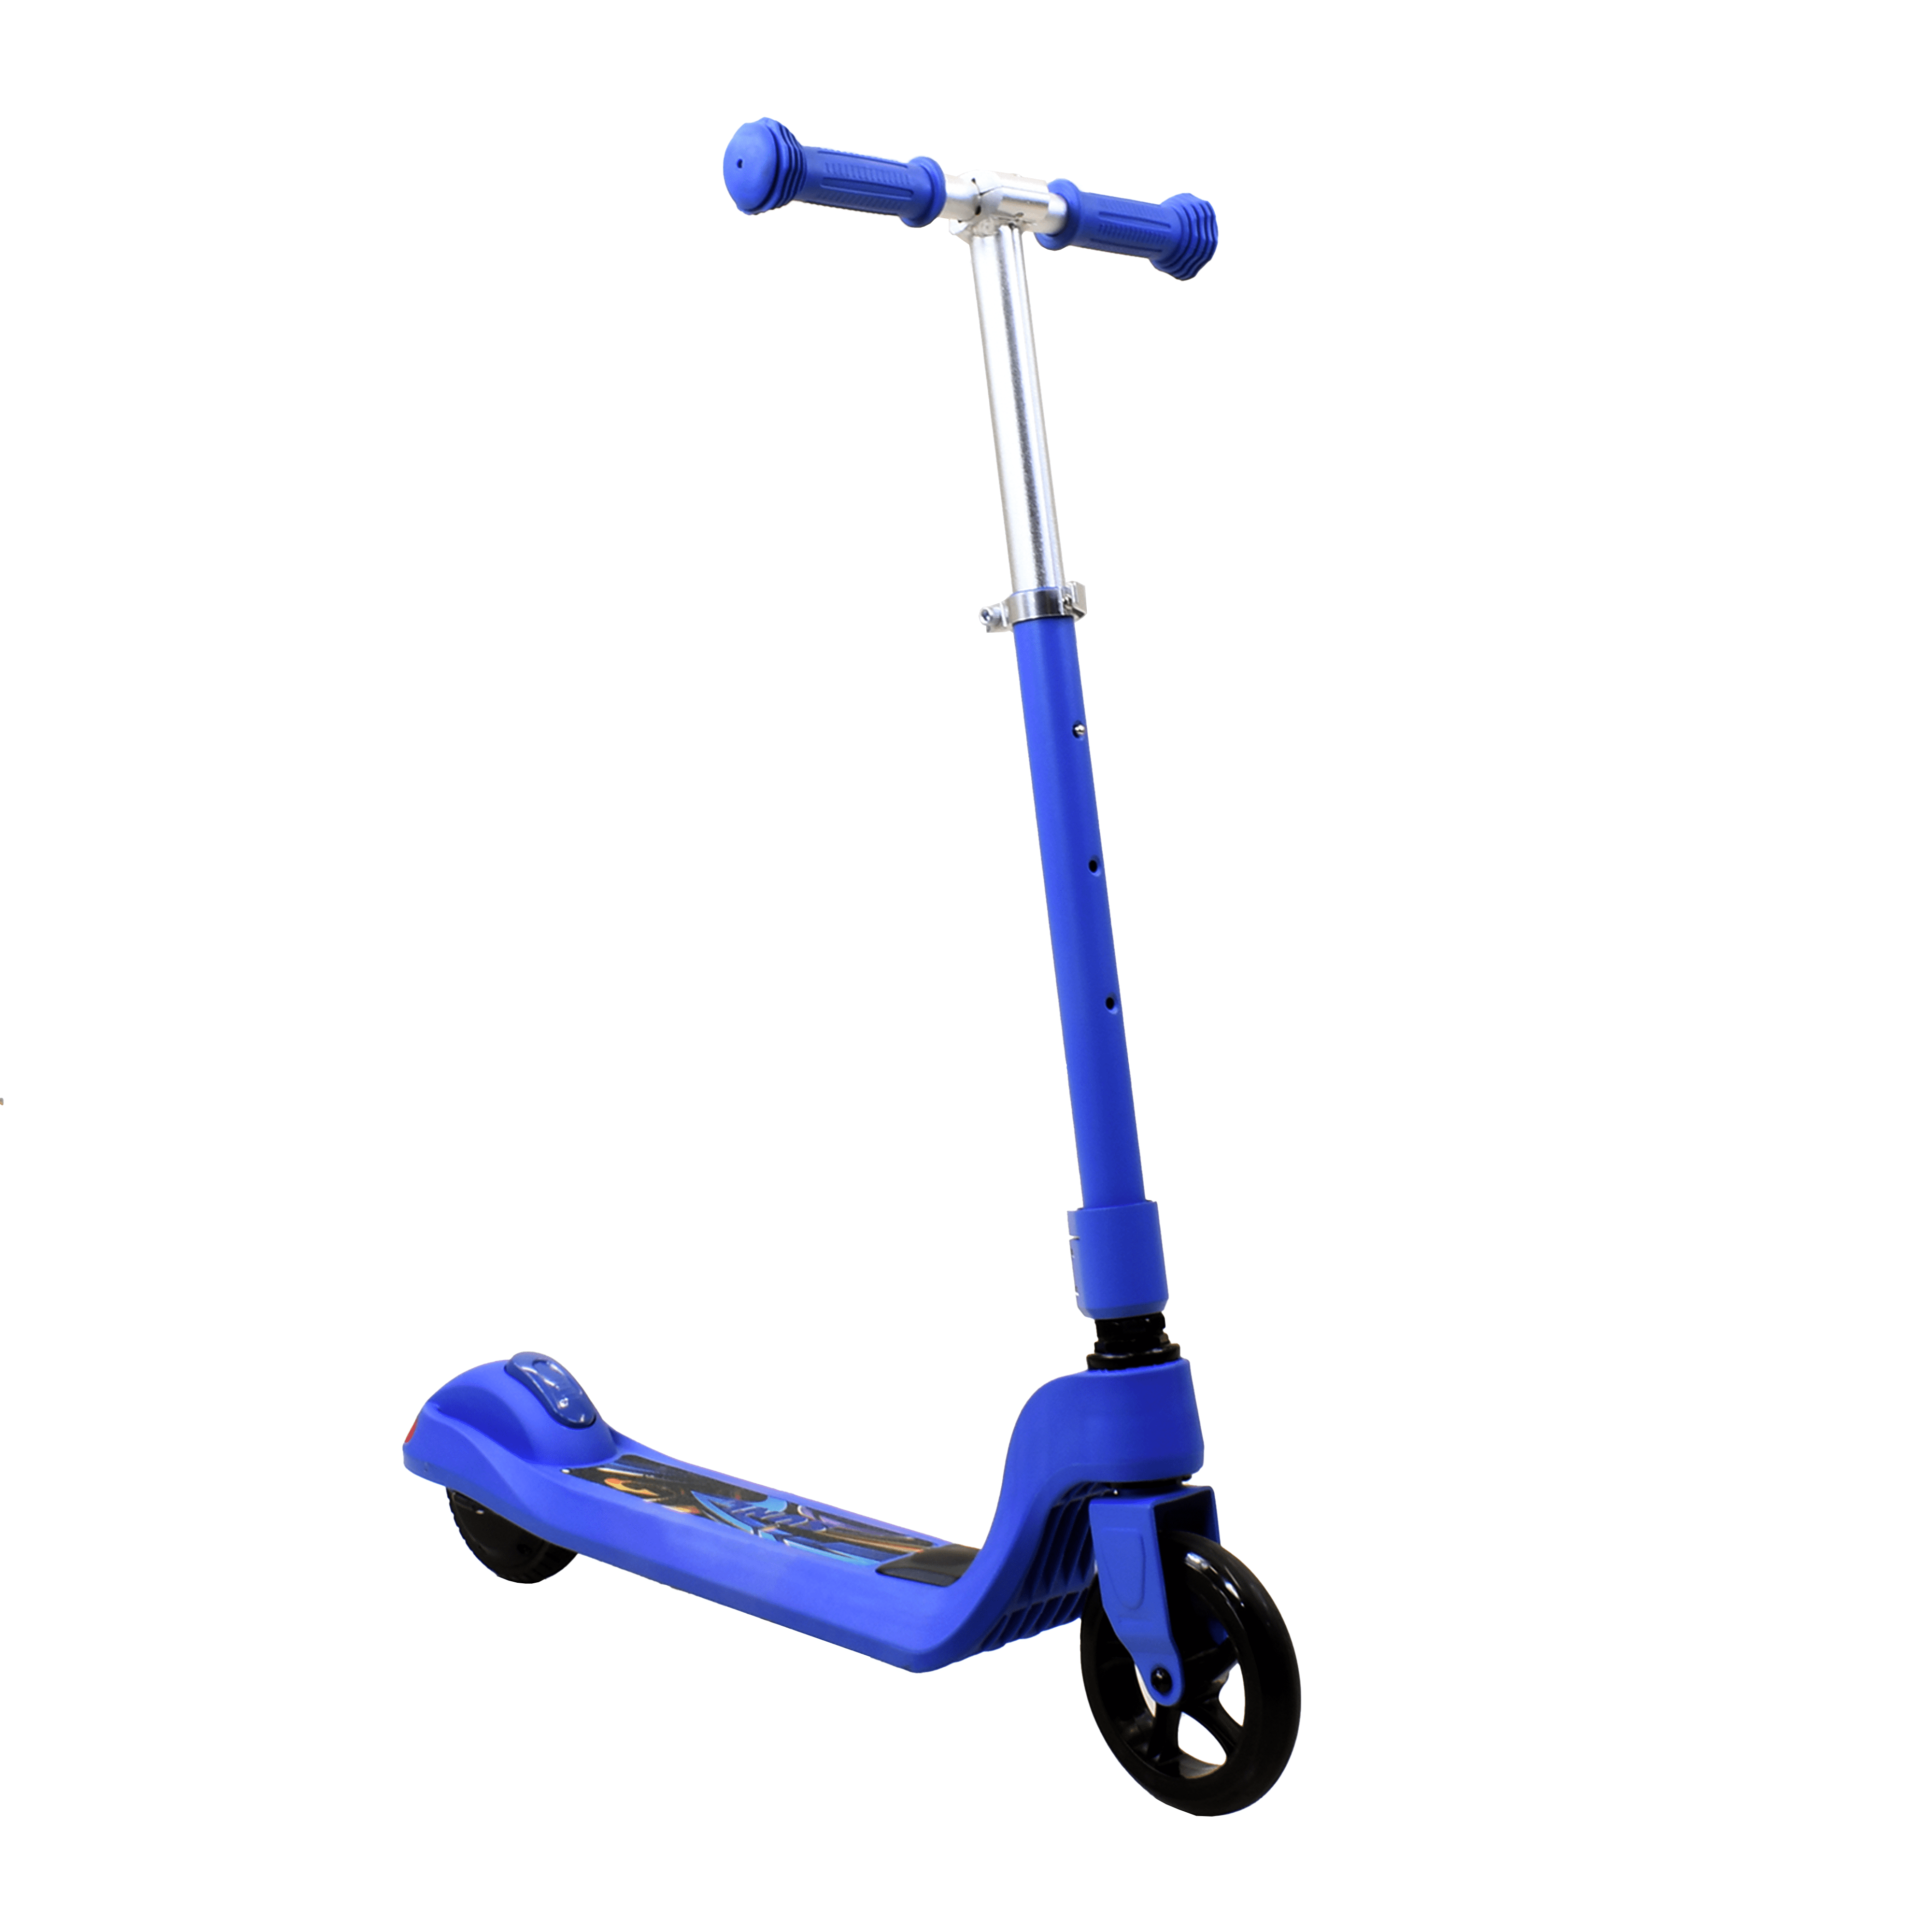 Massimo Kids 120W Electric Scooter, Max Speed 6 MPH, Max 6-9 Miles, Foldable and Portable (Blue) - Walmart.com